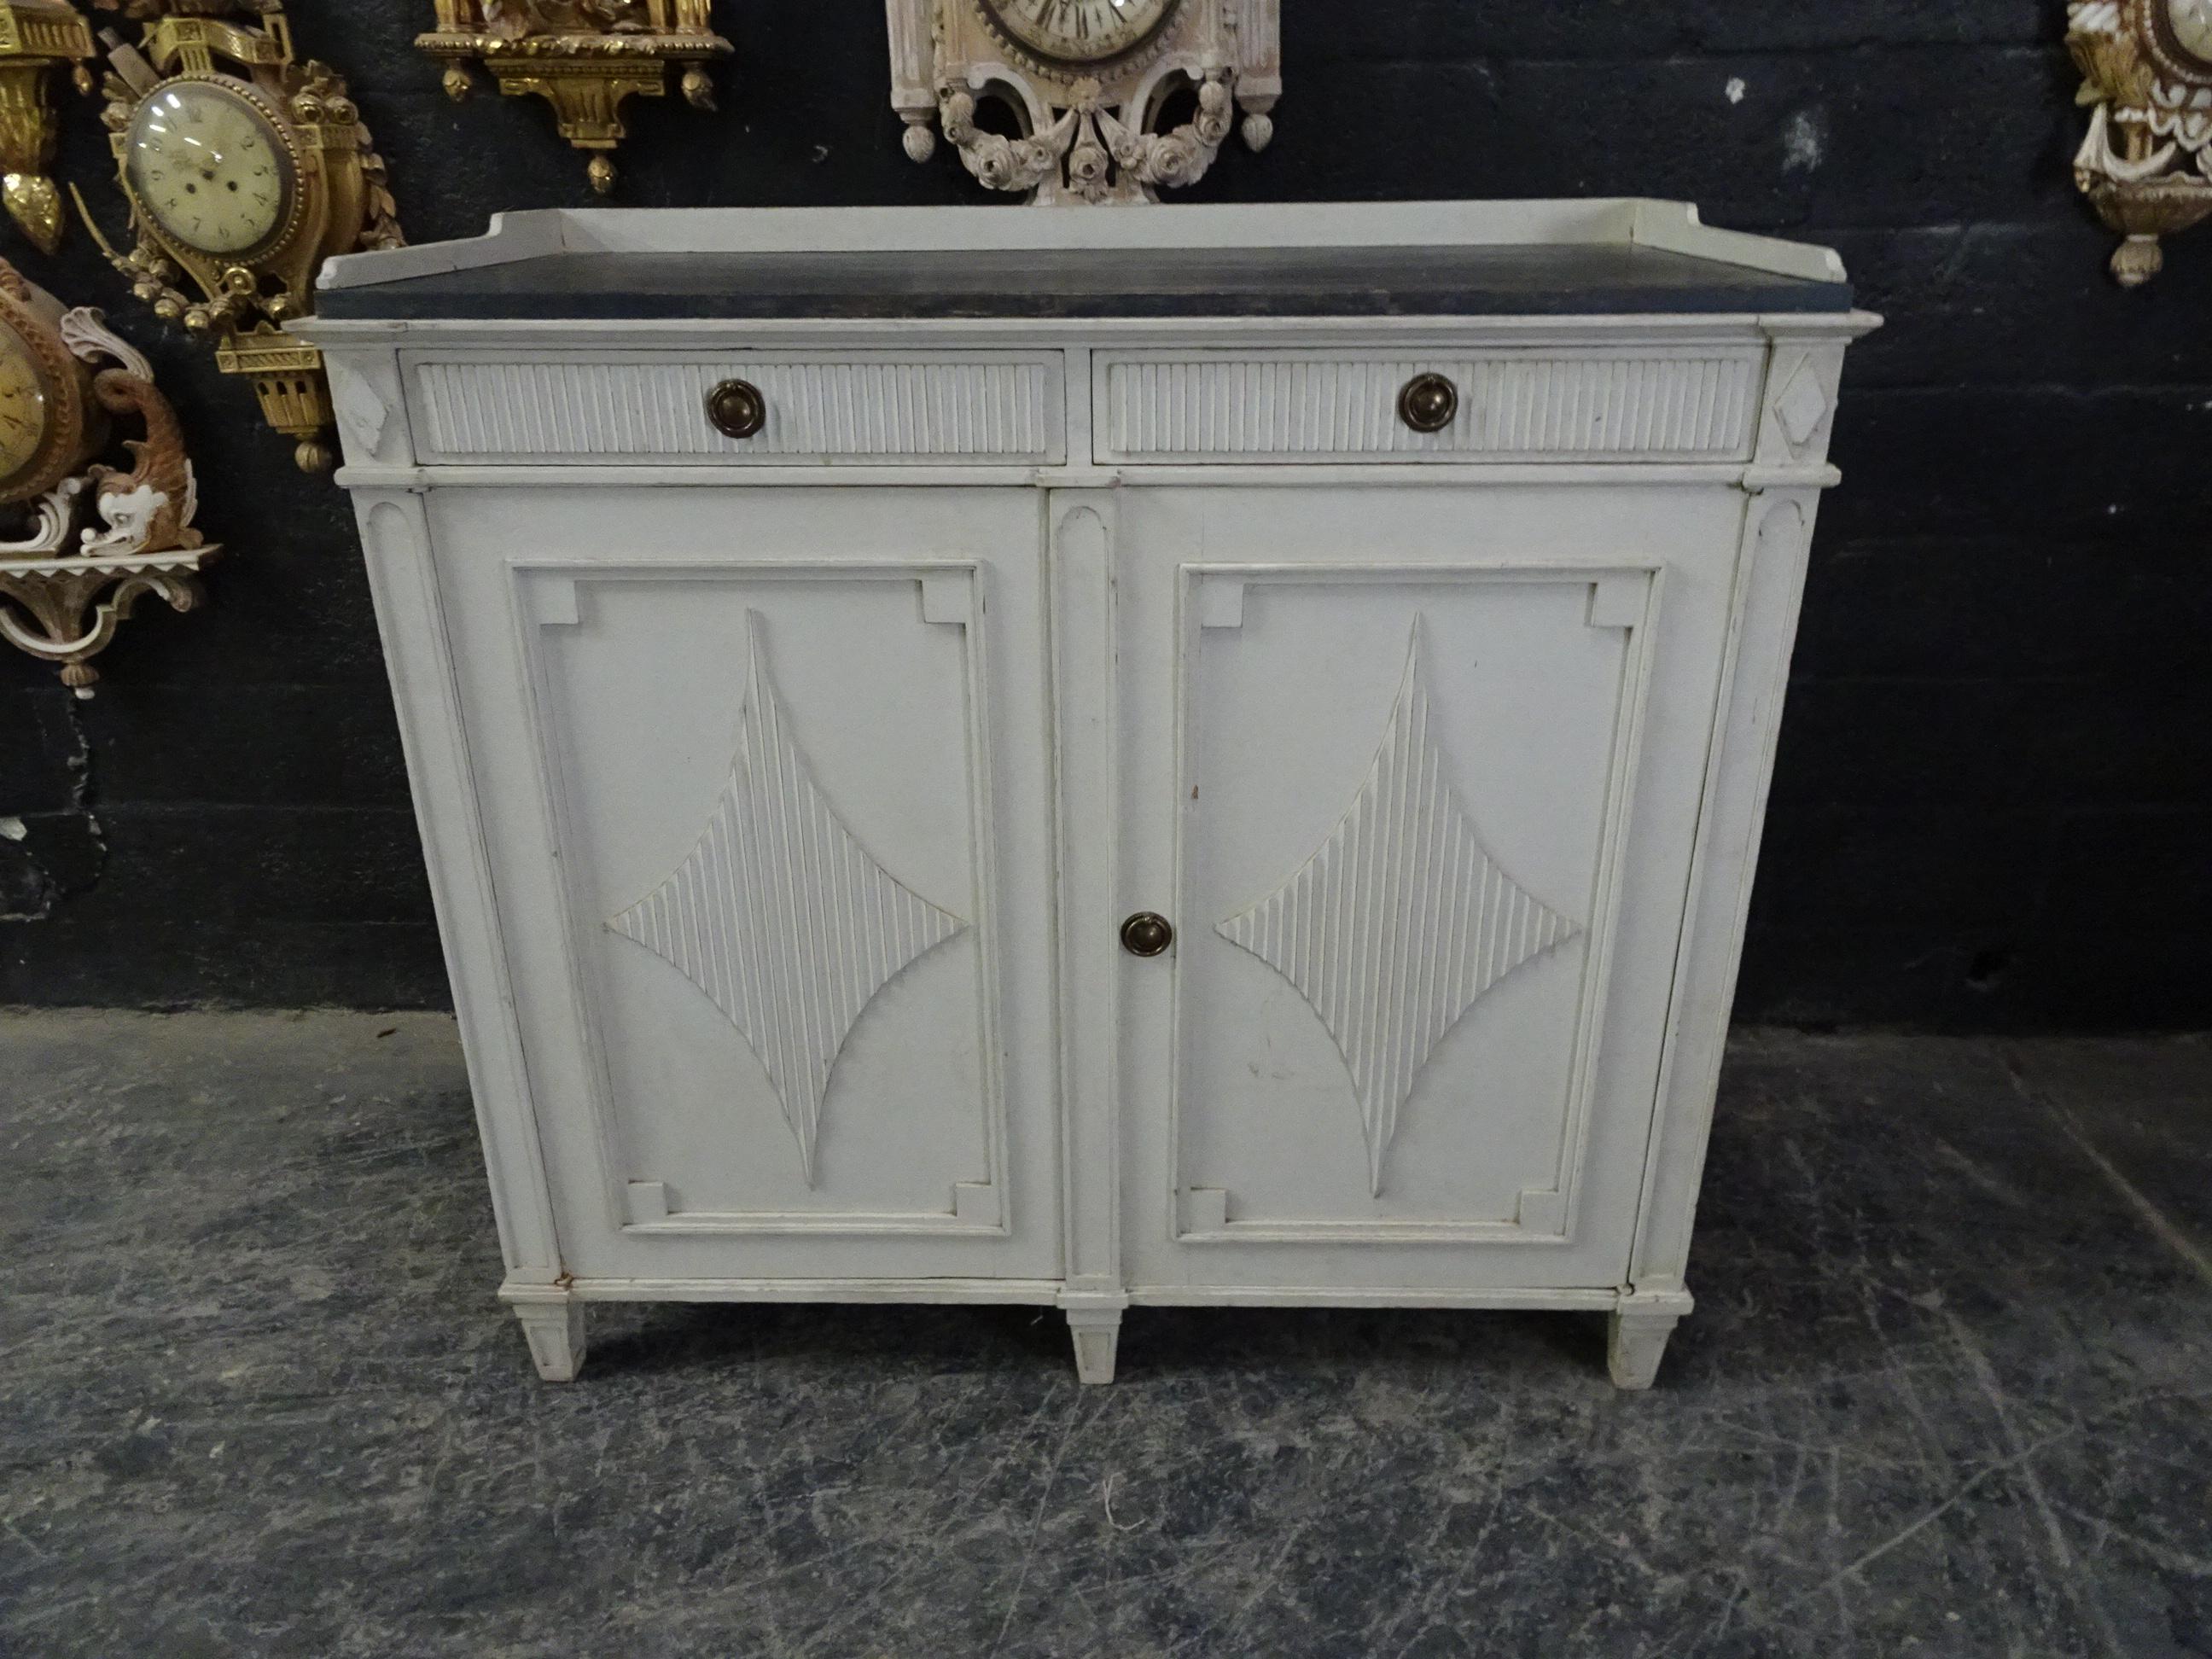 This is a Swedish Gustavain Sideboard. it was found at an estate auction in Stockholm, Sweden.